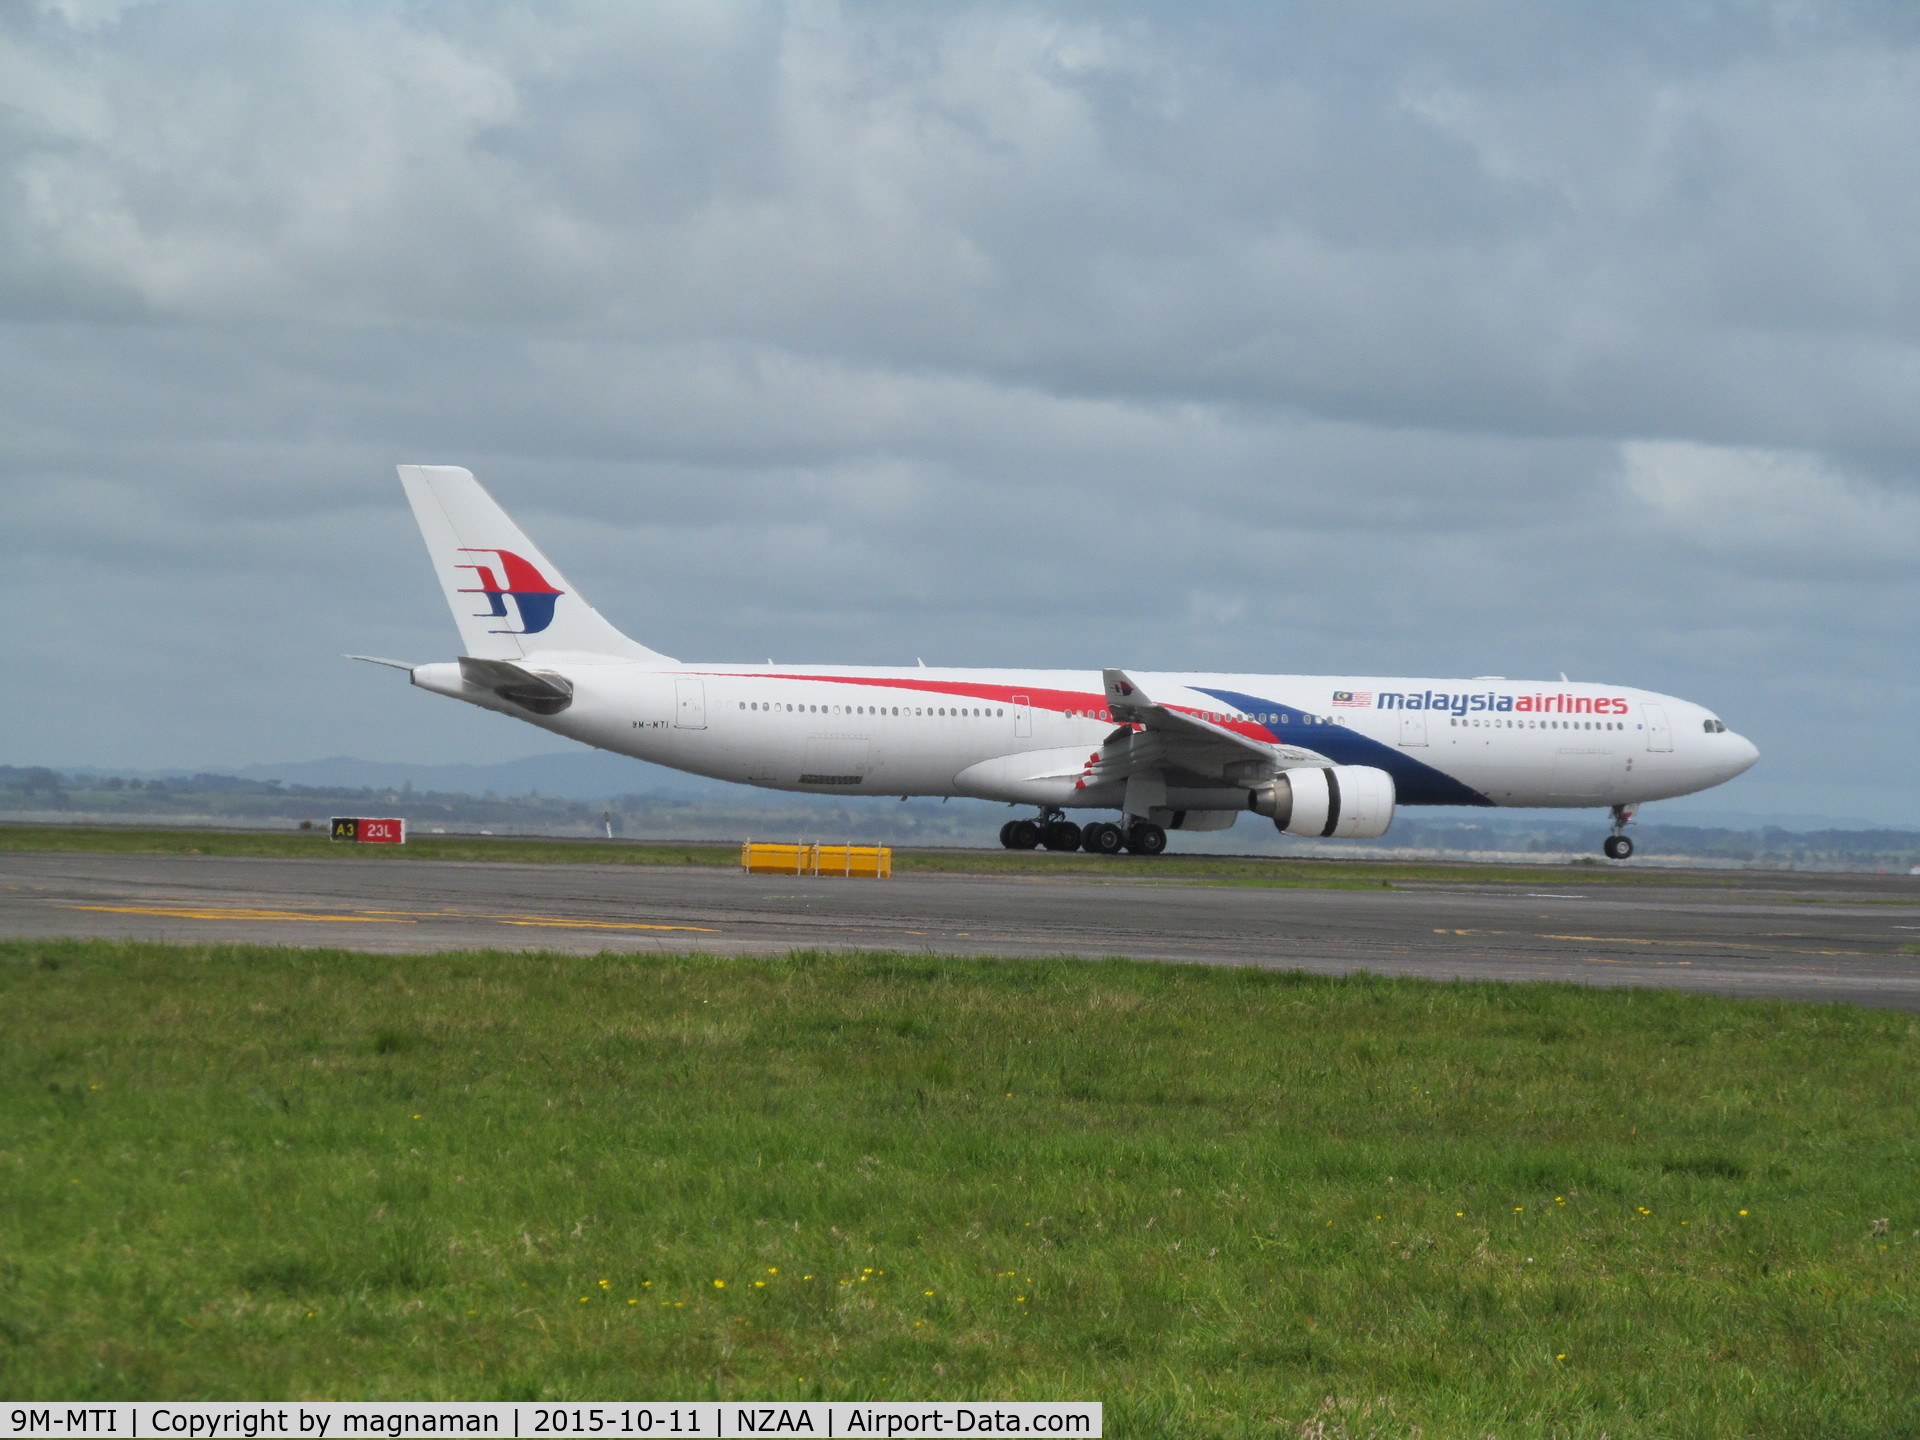 9M-MTI, 2012 Airbus A330-323(X) C/N 1337, and rest.